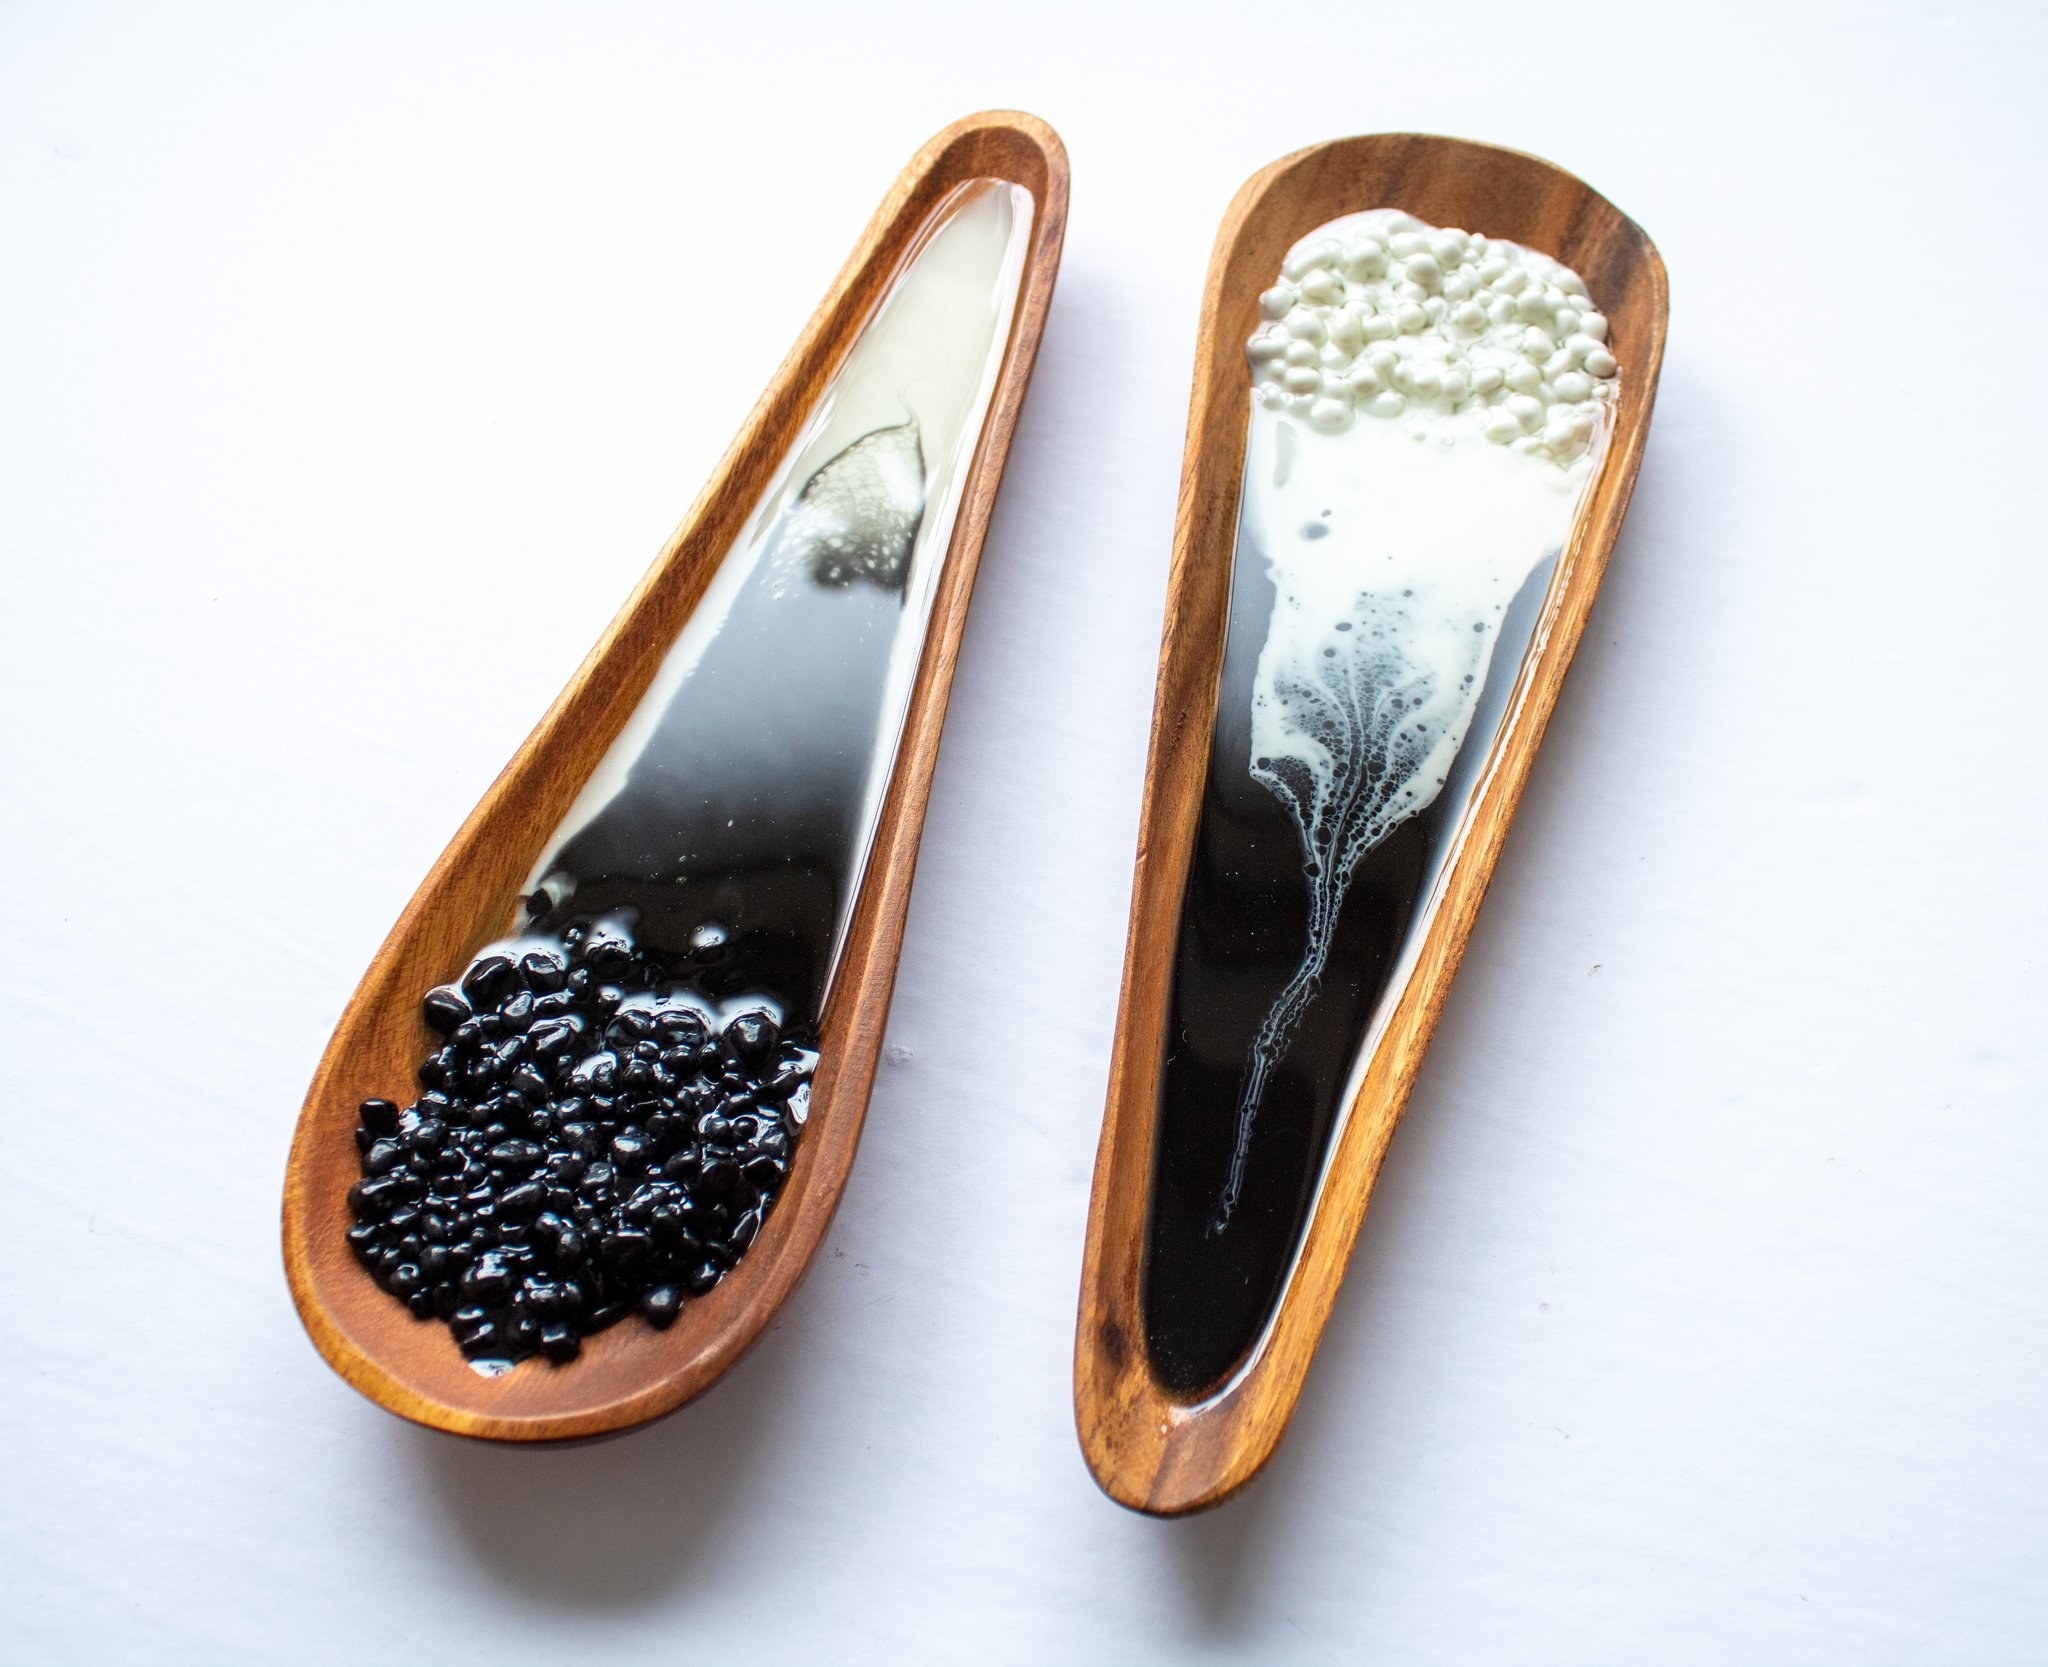 The wood spoon rest, which is round a wider on one side and smaller on the other,  and black and white resin in the inside